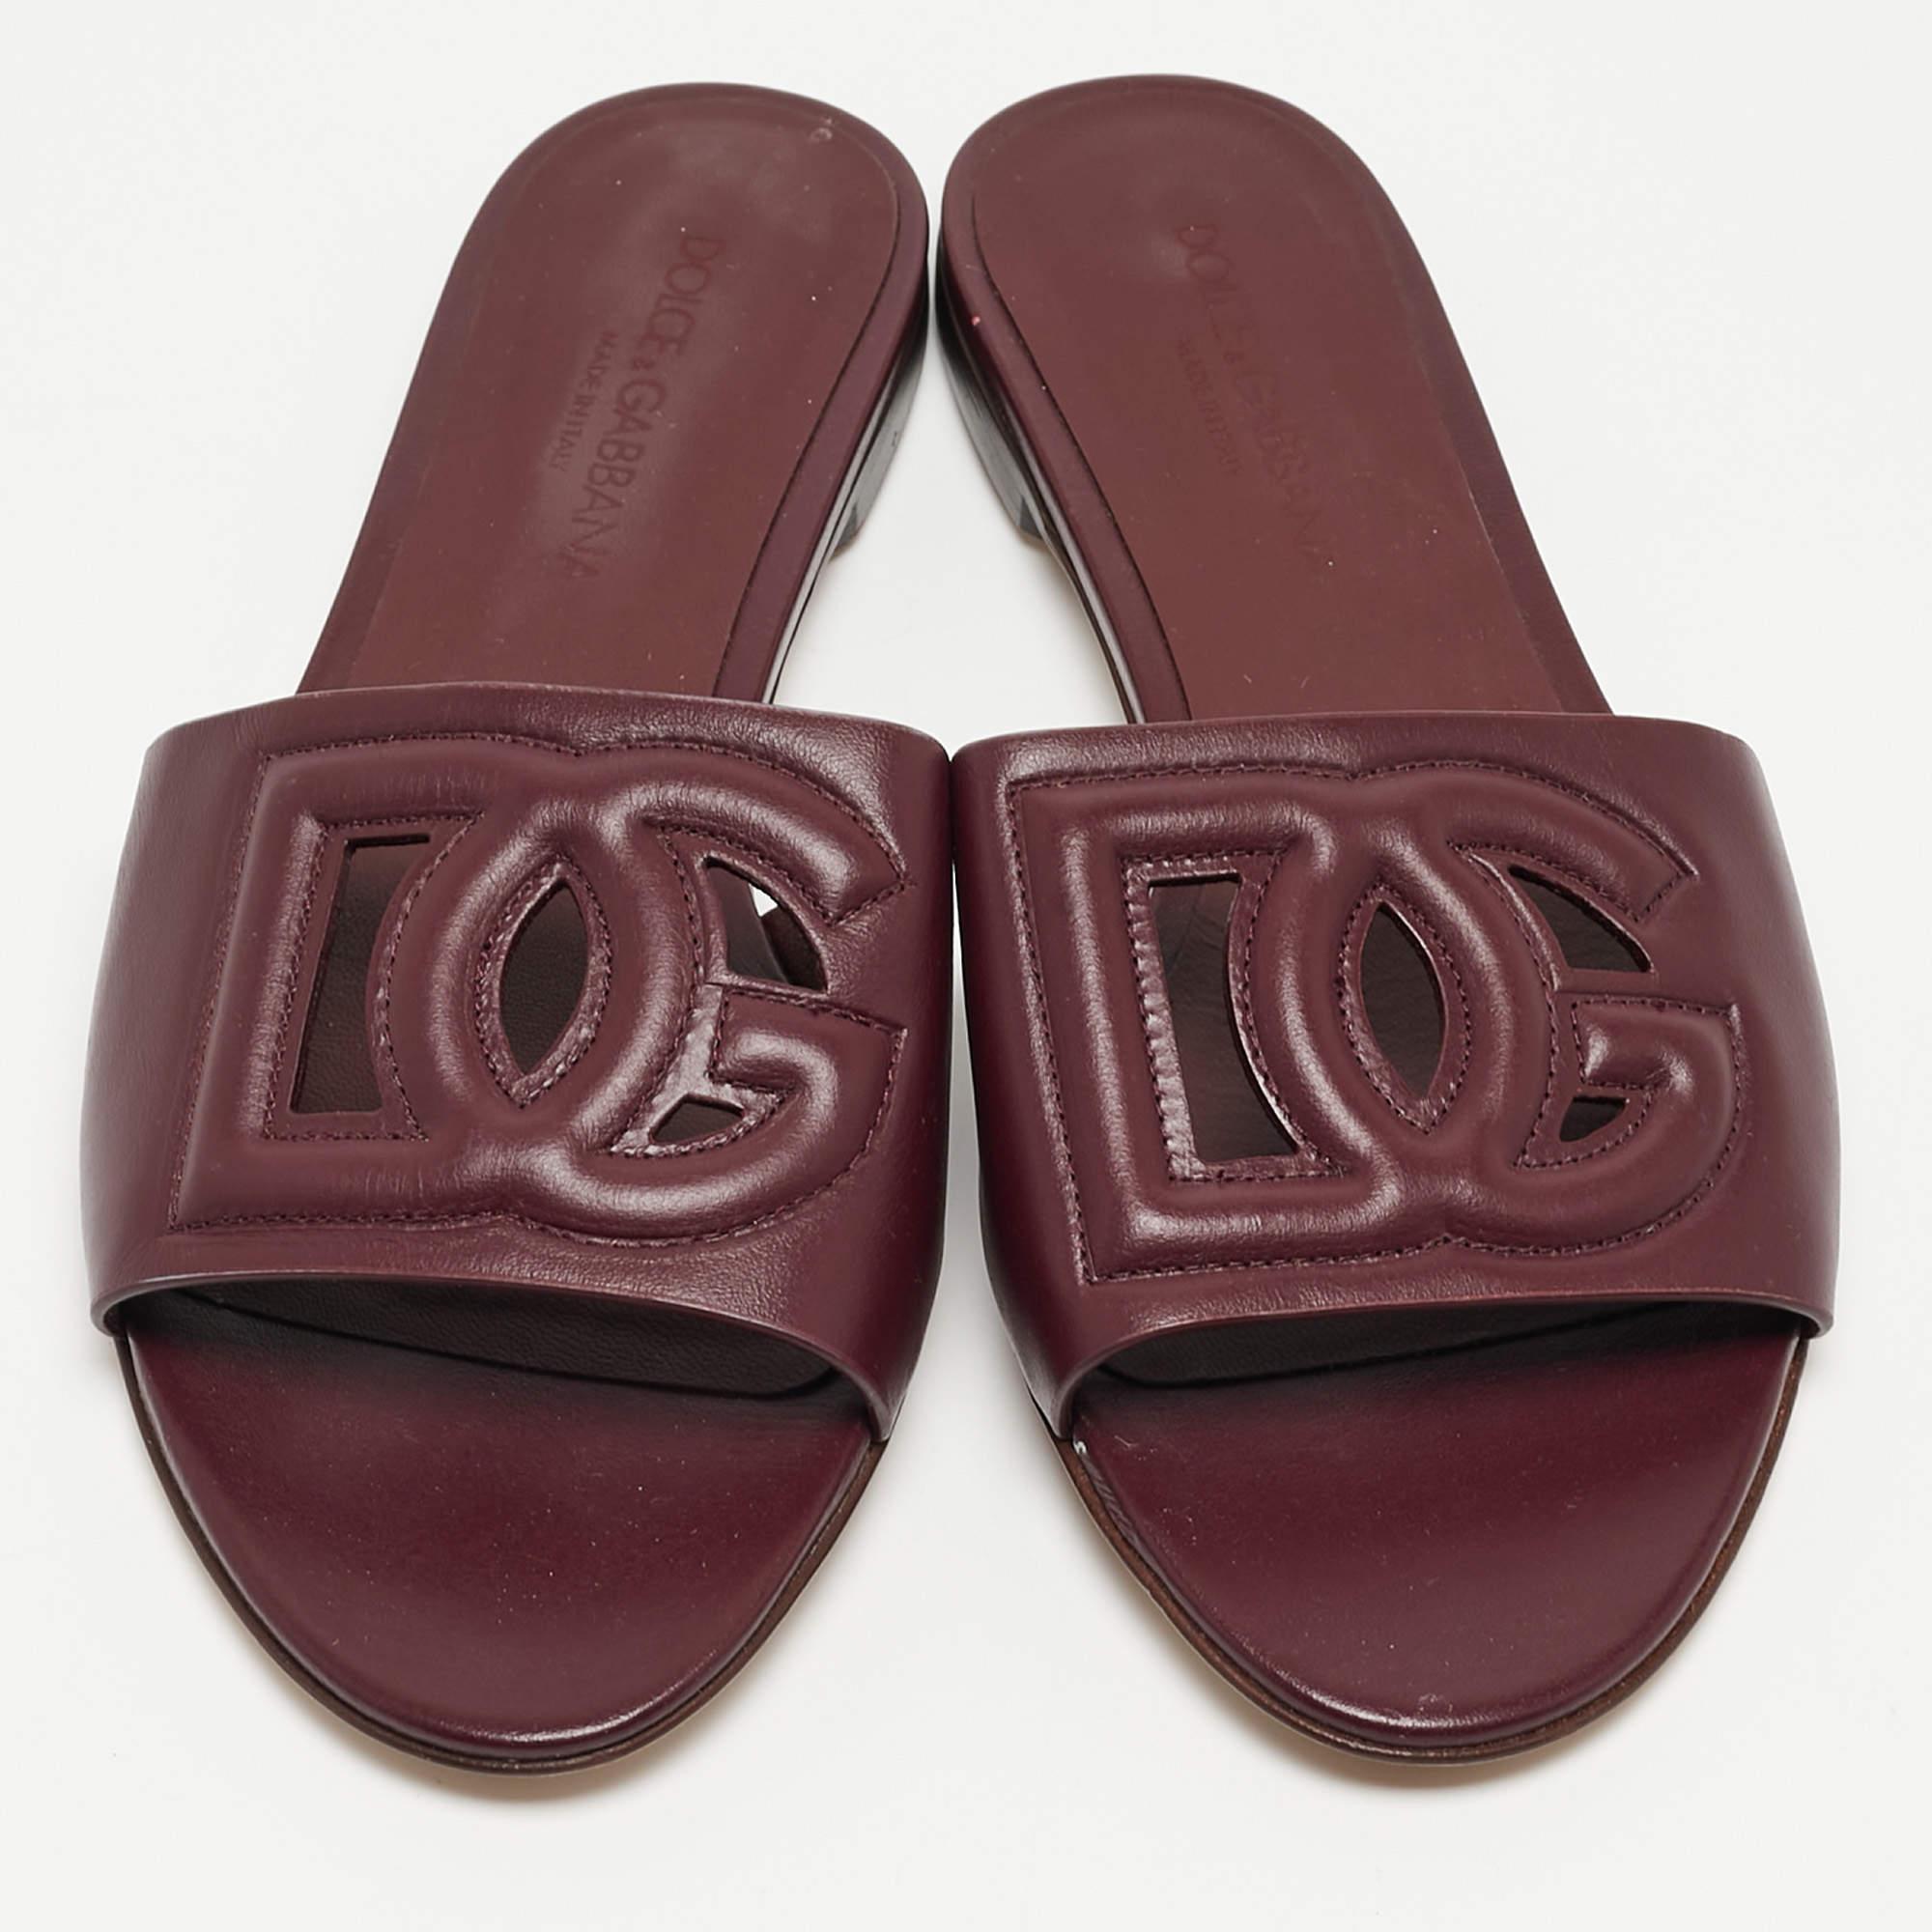 Enhance your casual looks with a touch of high style with these designer slides. Rendered in quality material with a lovely hue adorning its expanse, this pair is a must-have!

Includes
Original Dustbag